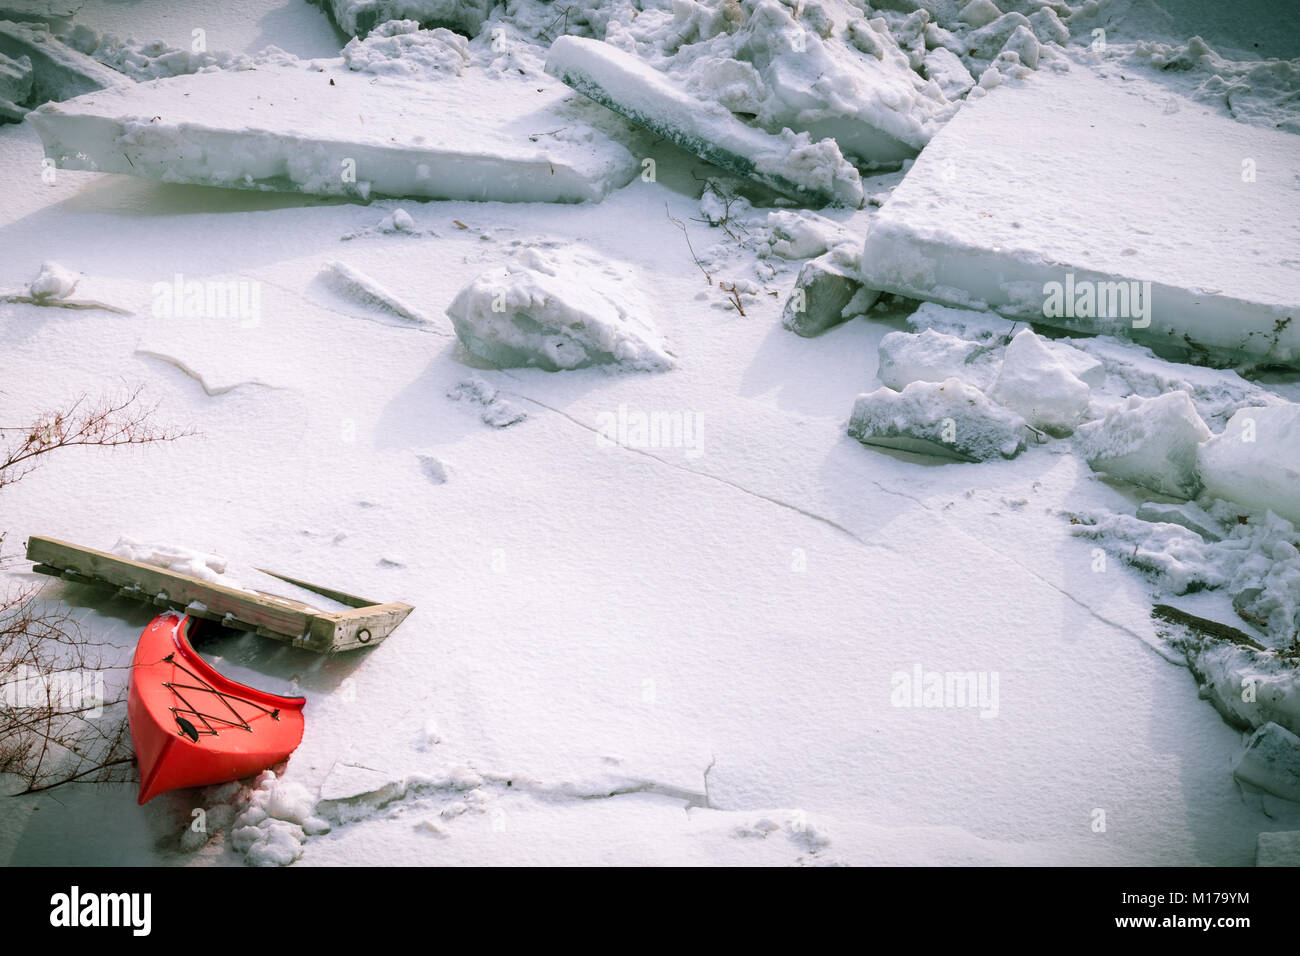 A red kayak and a portion of a wooden dock lay stuck near an ice floe in a frozen river. Stock Photo